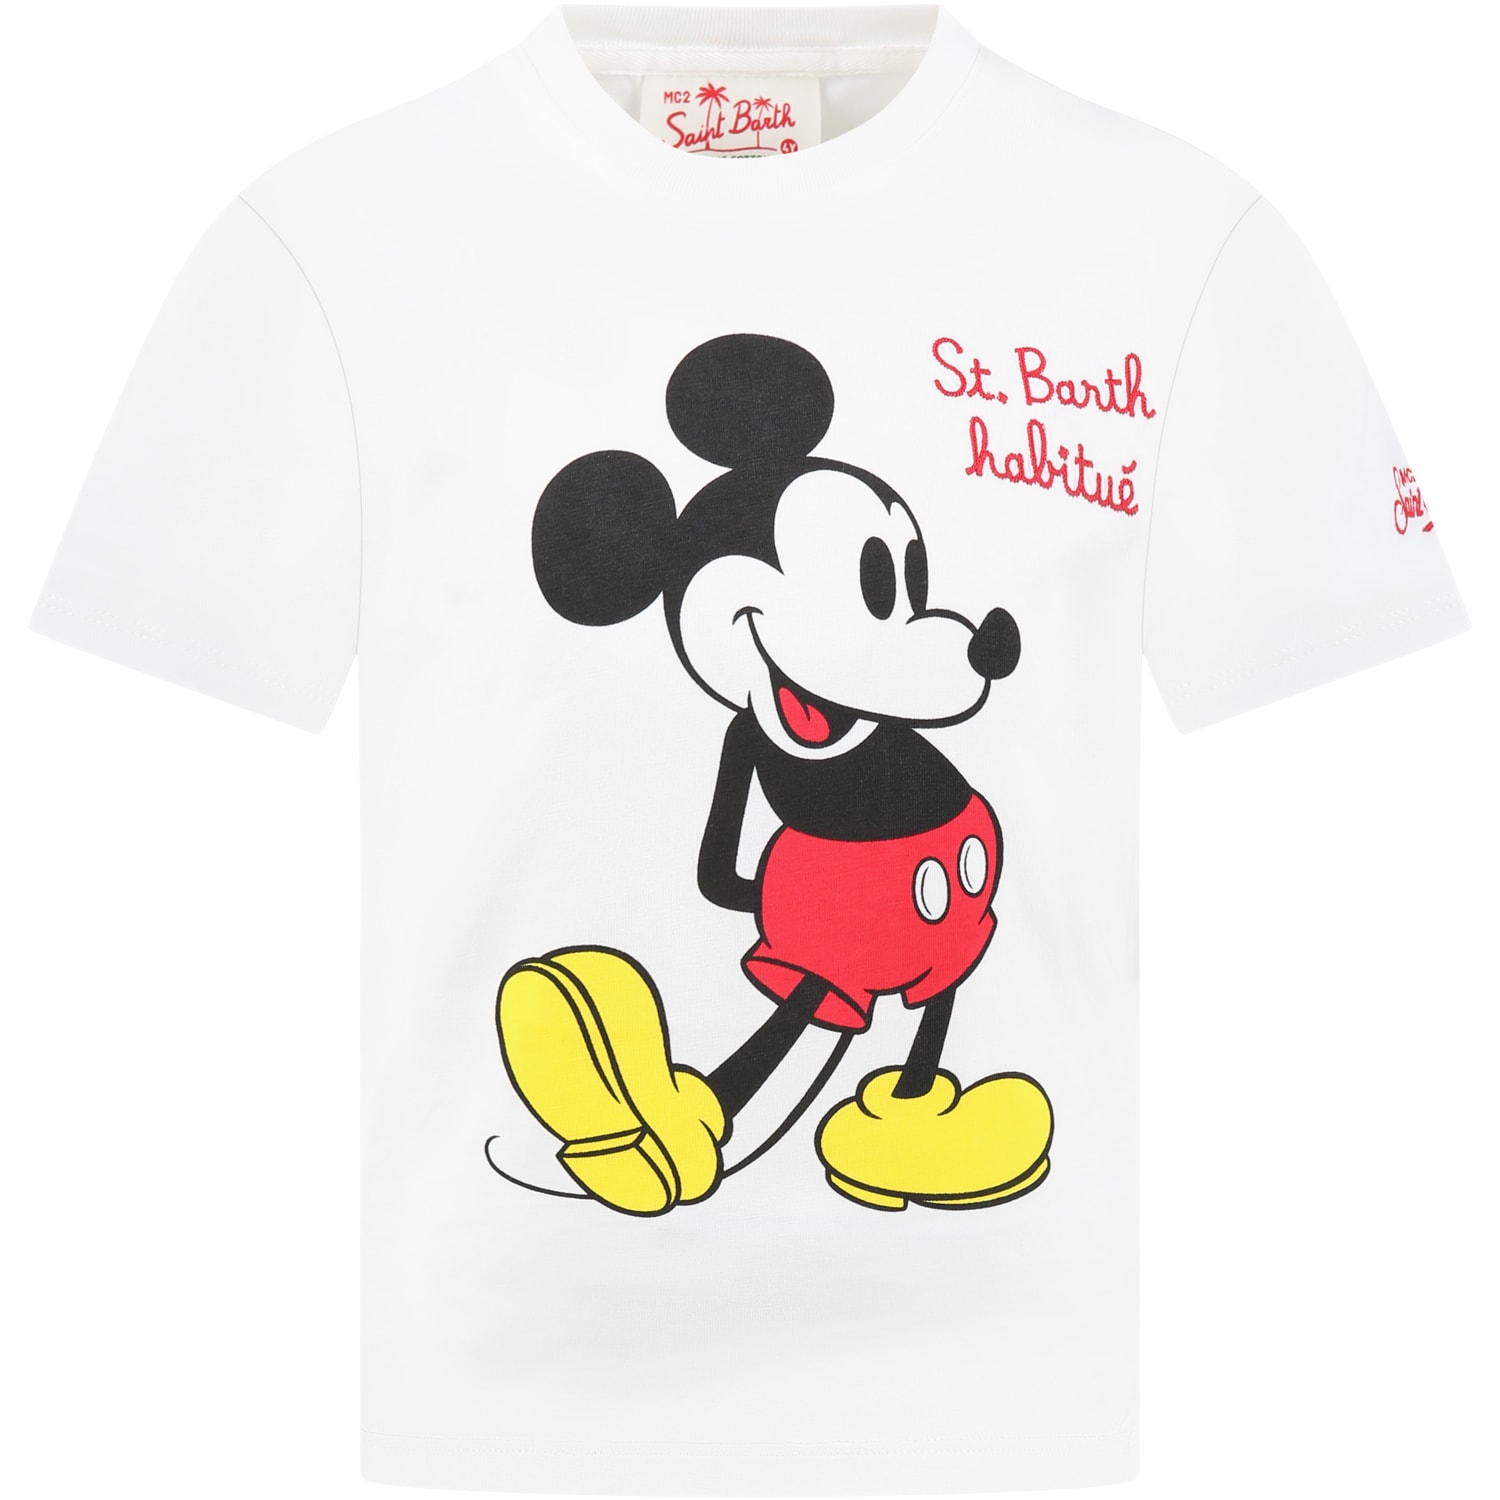 MC2 SAINT BARTH WHITE T-SHIRT FOR BOY WITH MICKEY MOUSE PRINT, ST. BARTH HABITUÉ WRITING AND LOGO